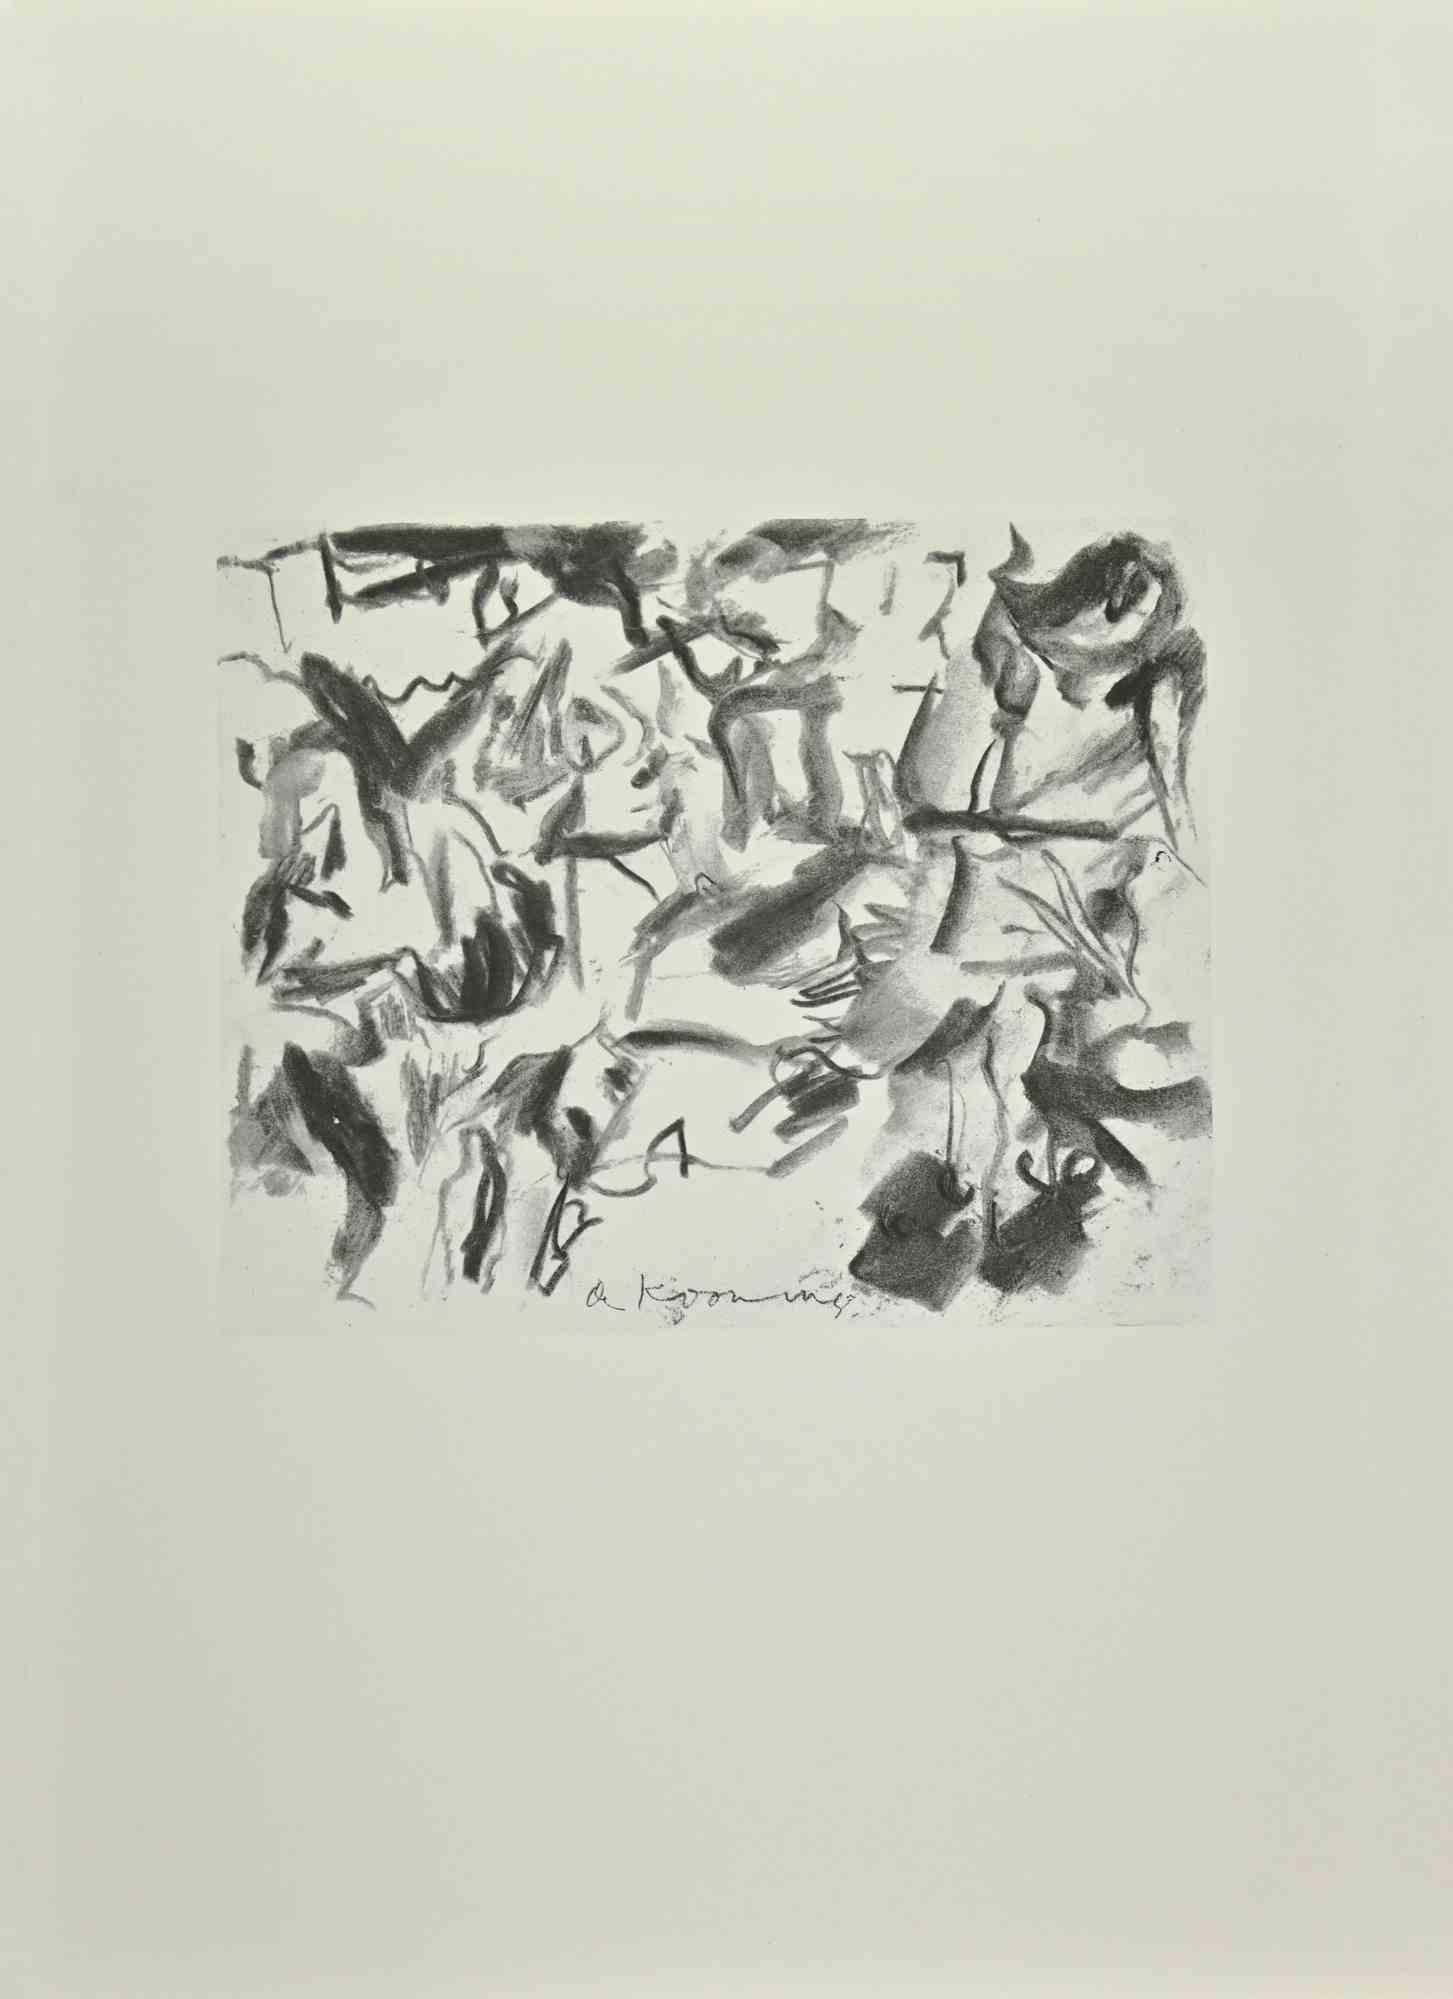 Willem de Kooning Abstract Print - Untitled - Offset and Lithograph after Willem De Kooning - 1985